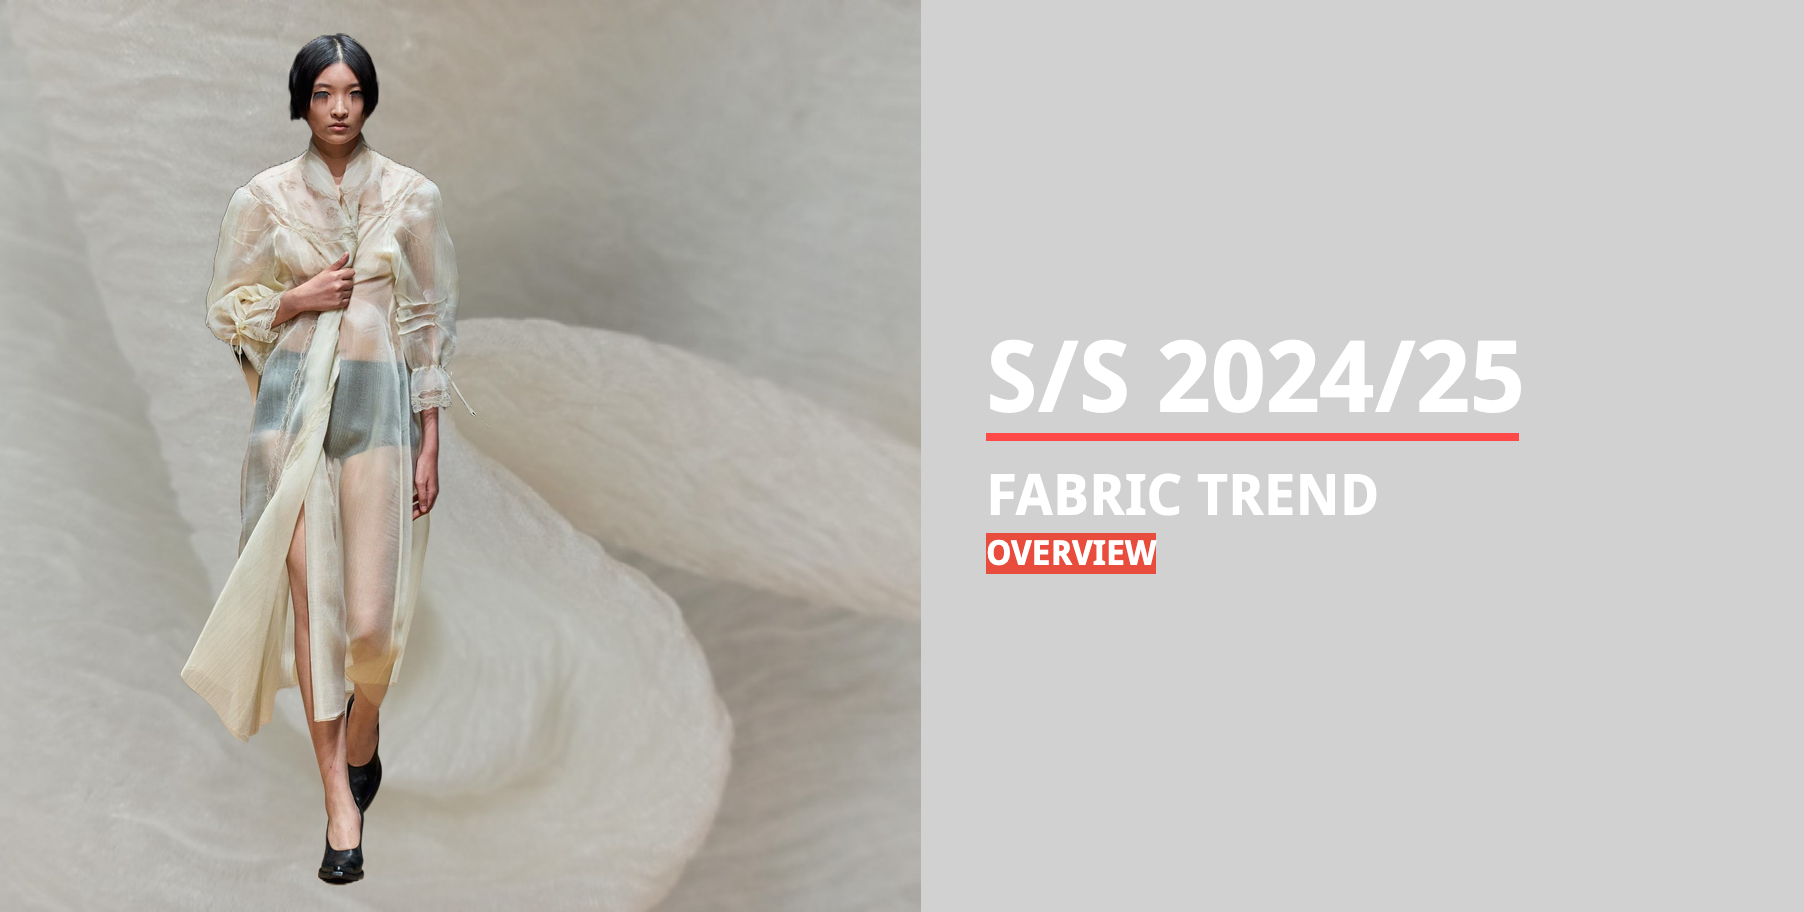 S/S 2024/25 Fabric Trend Overview Ftrend